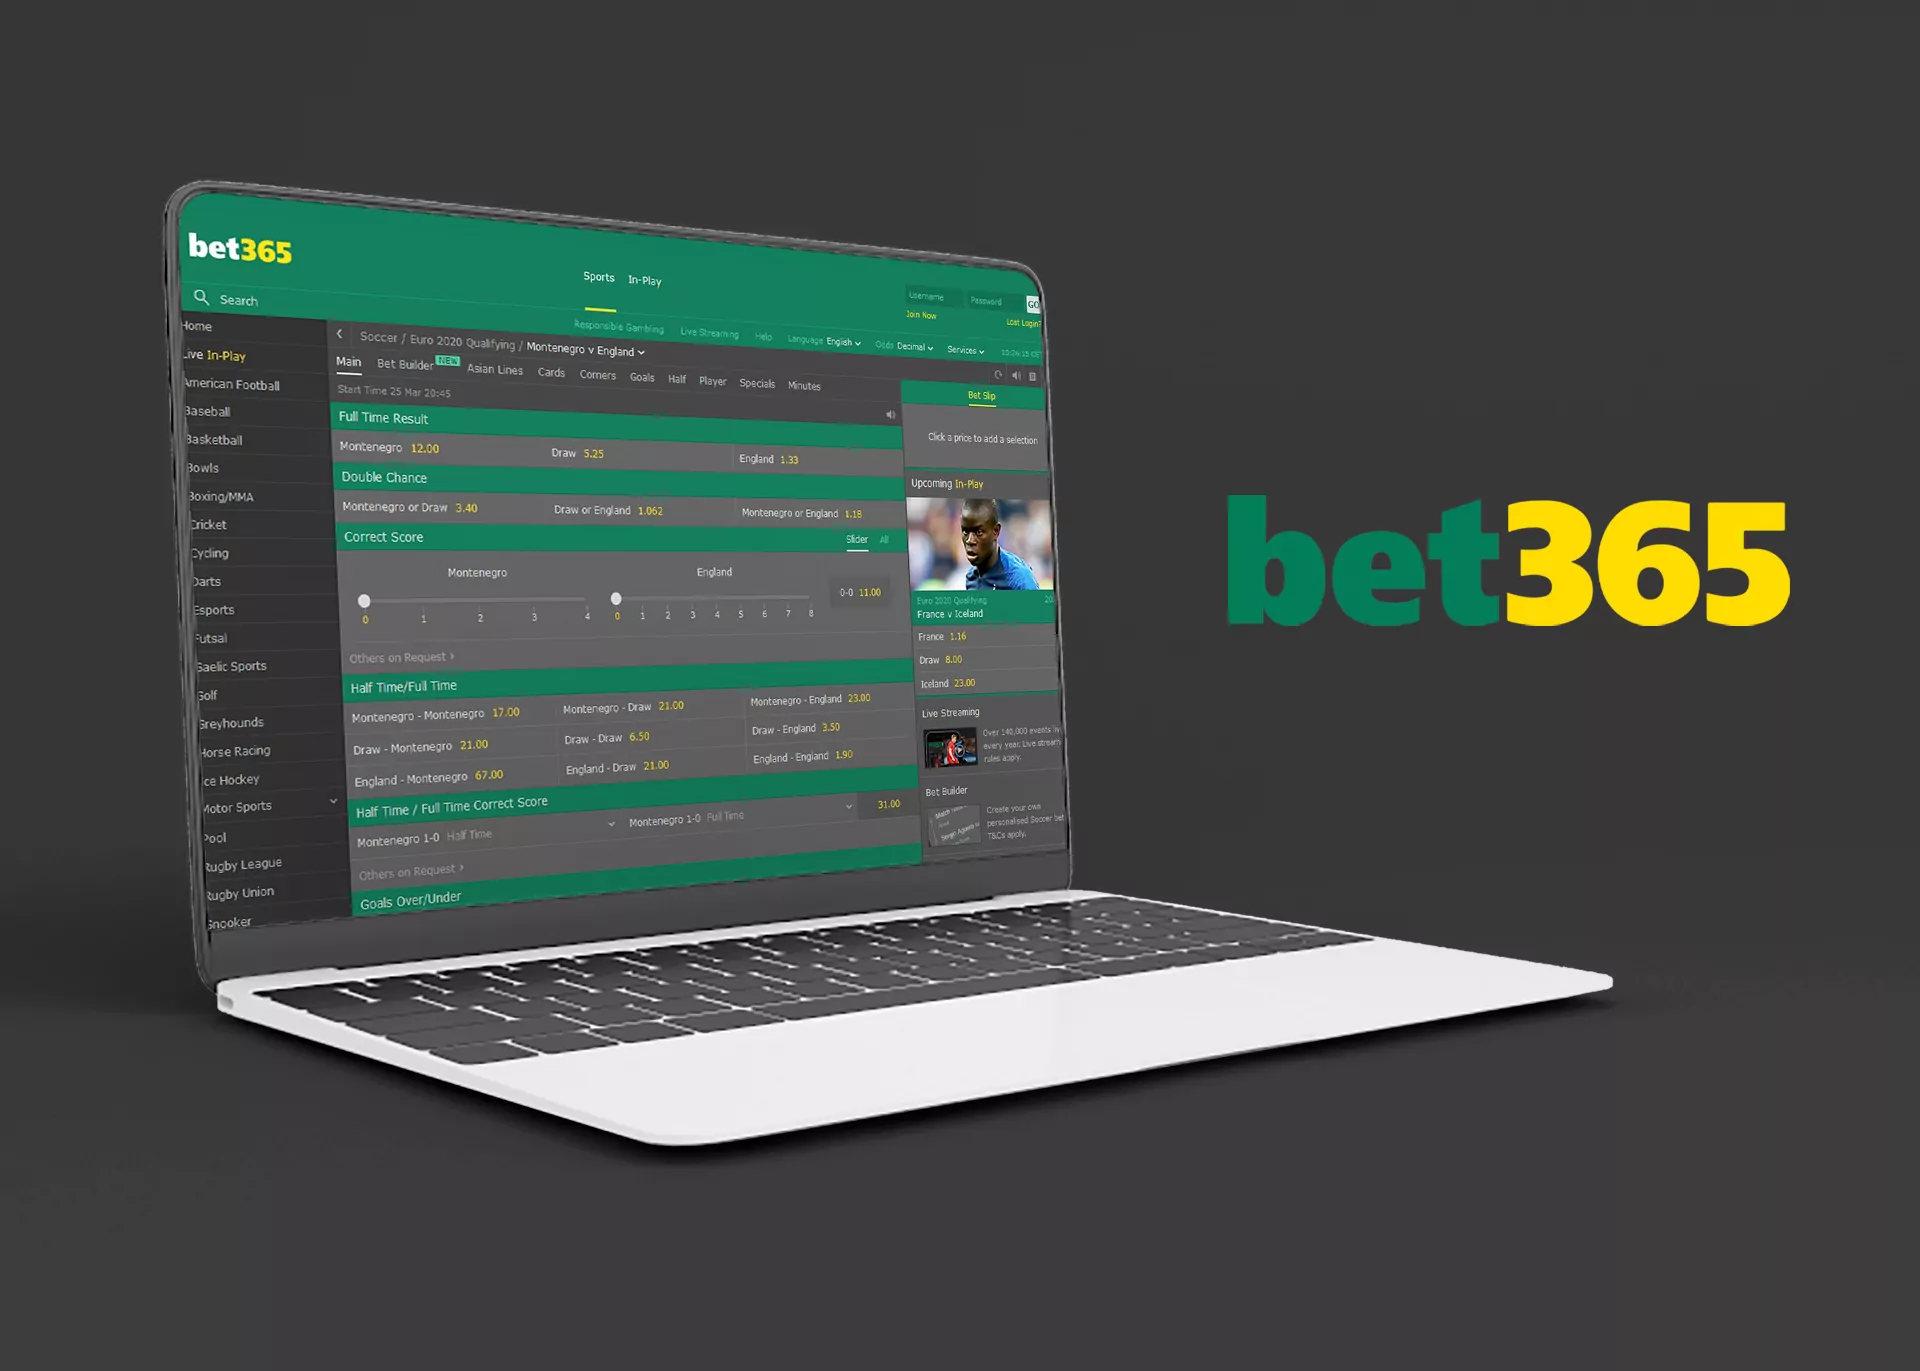 Bet365 has great options for depositing and withdrawing funds, video streaming, and a long list of matches available for betting.